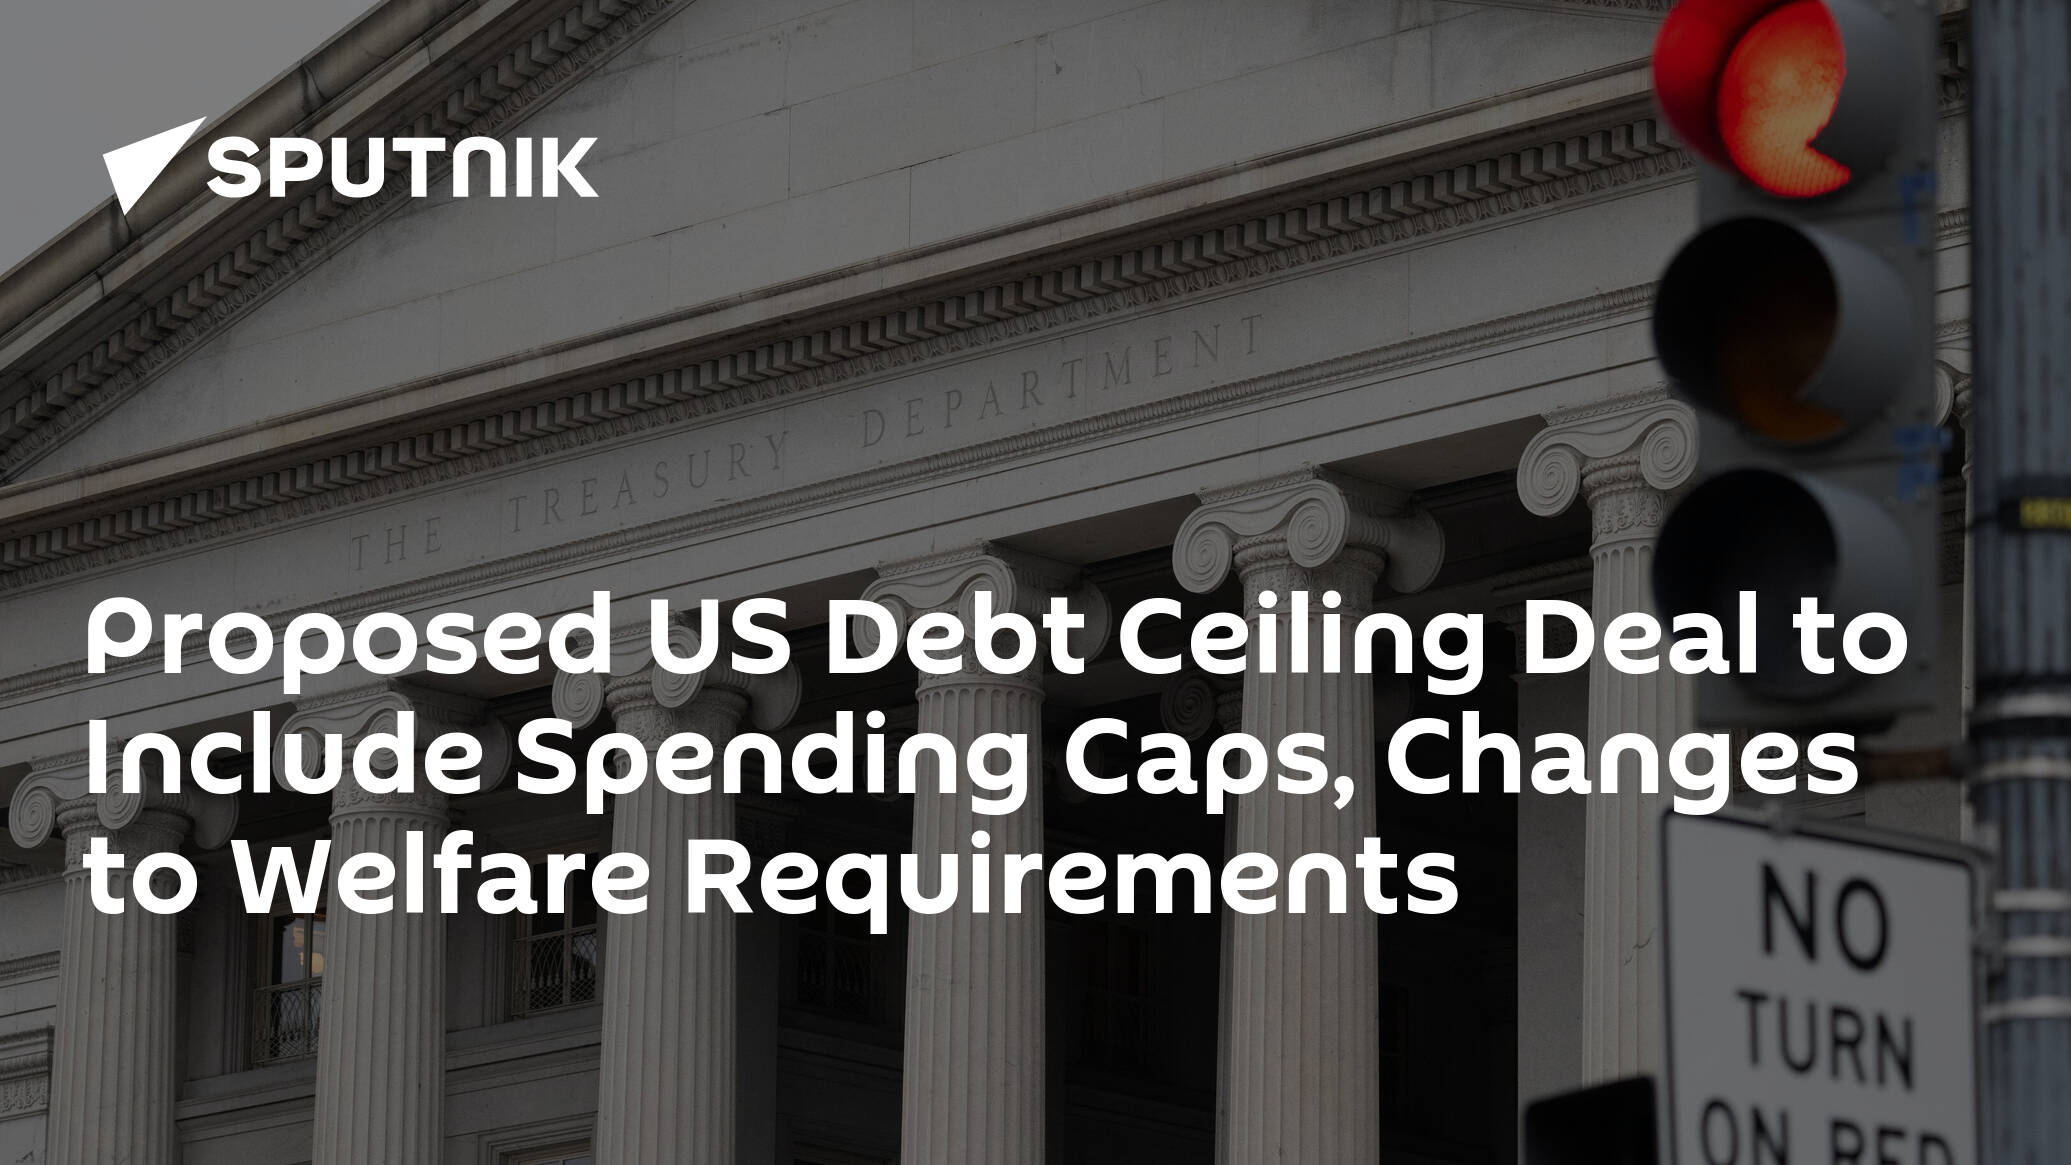 Proposed US Debt Ceiling Deal to Include Spending Caps, Changes to Welfare Requirements